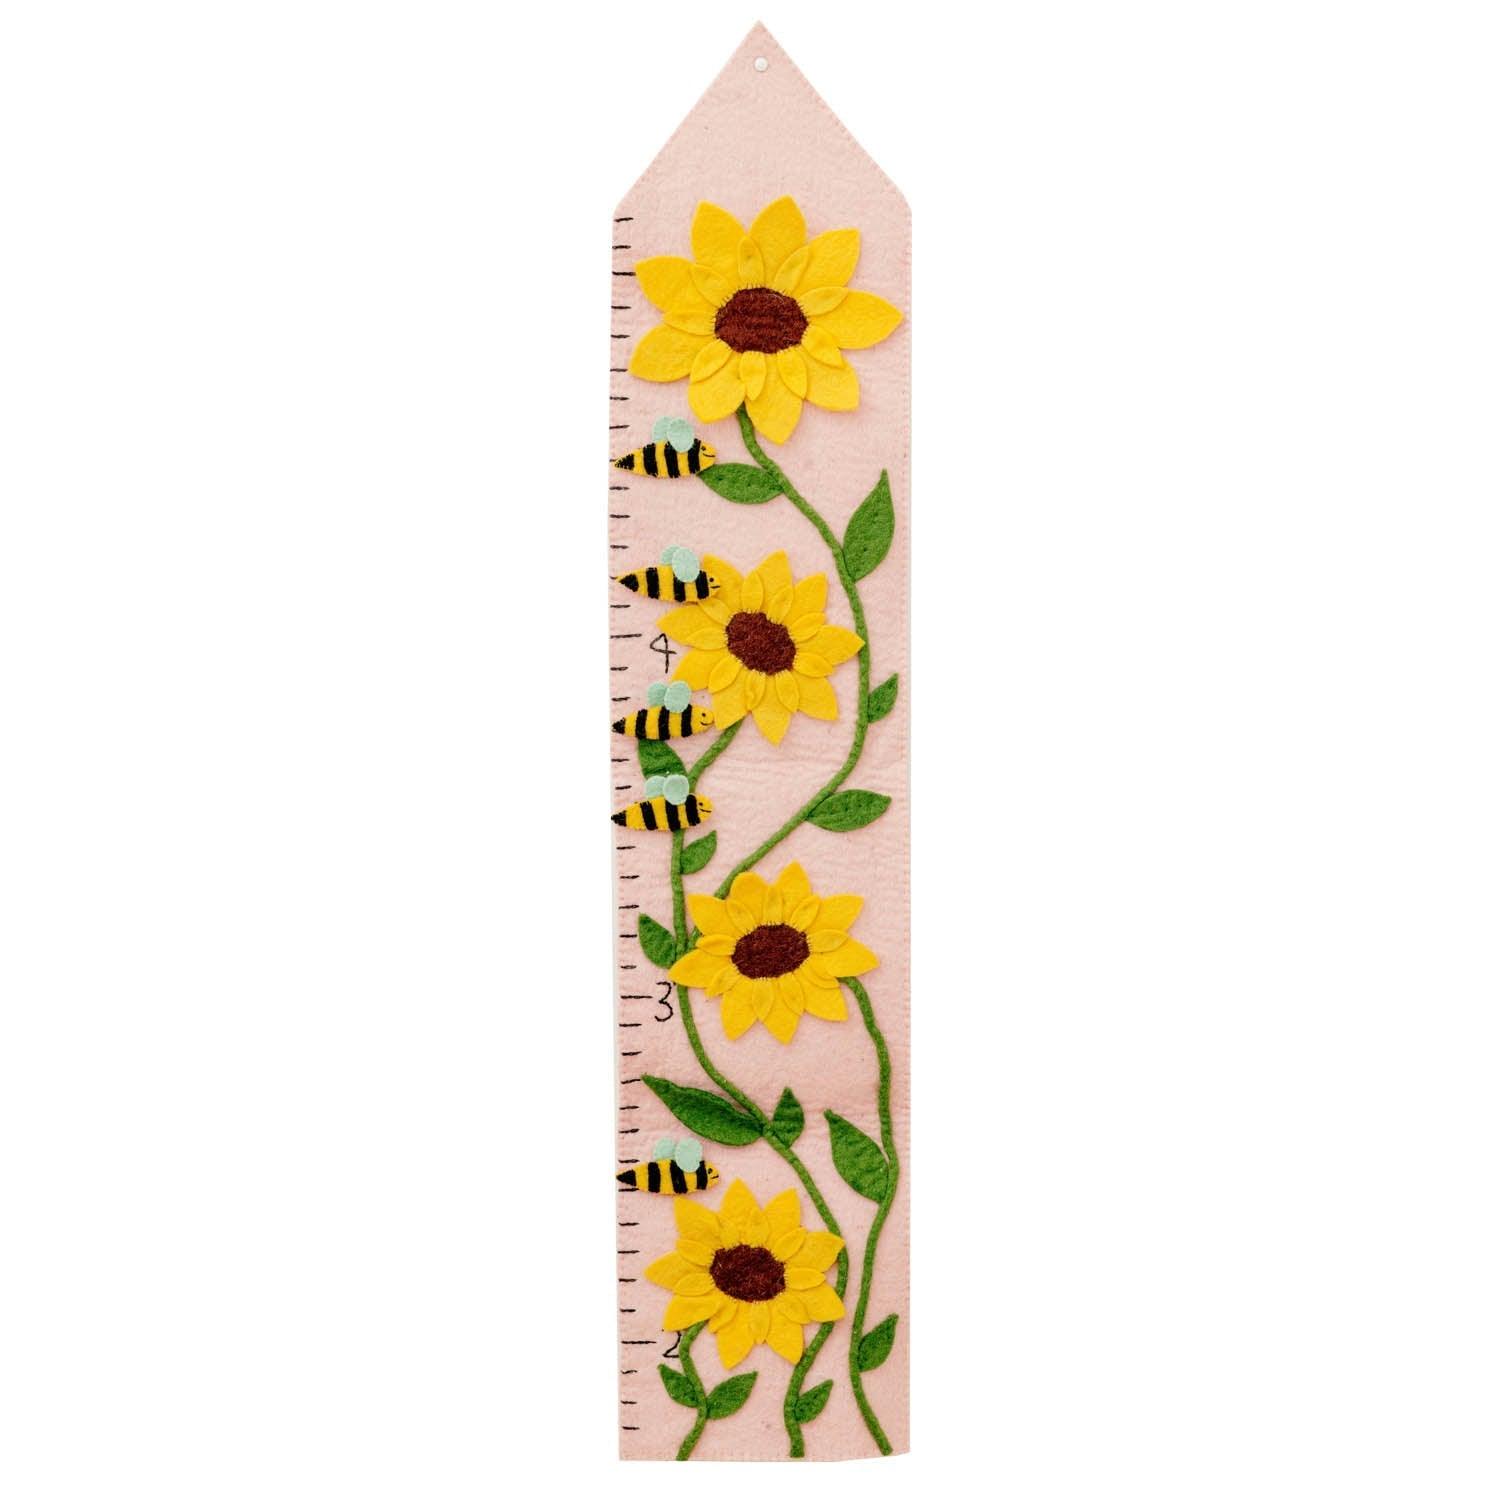 Felt Sunflower Growth Chart - Why and Whale